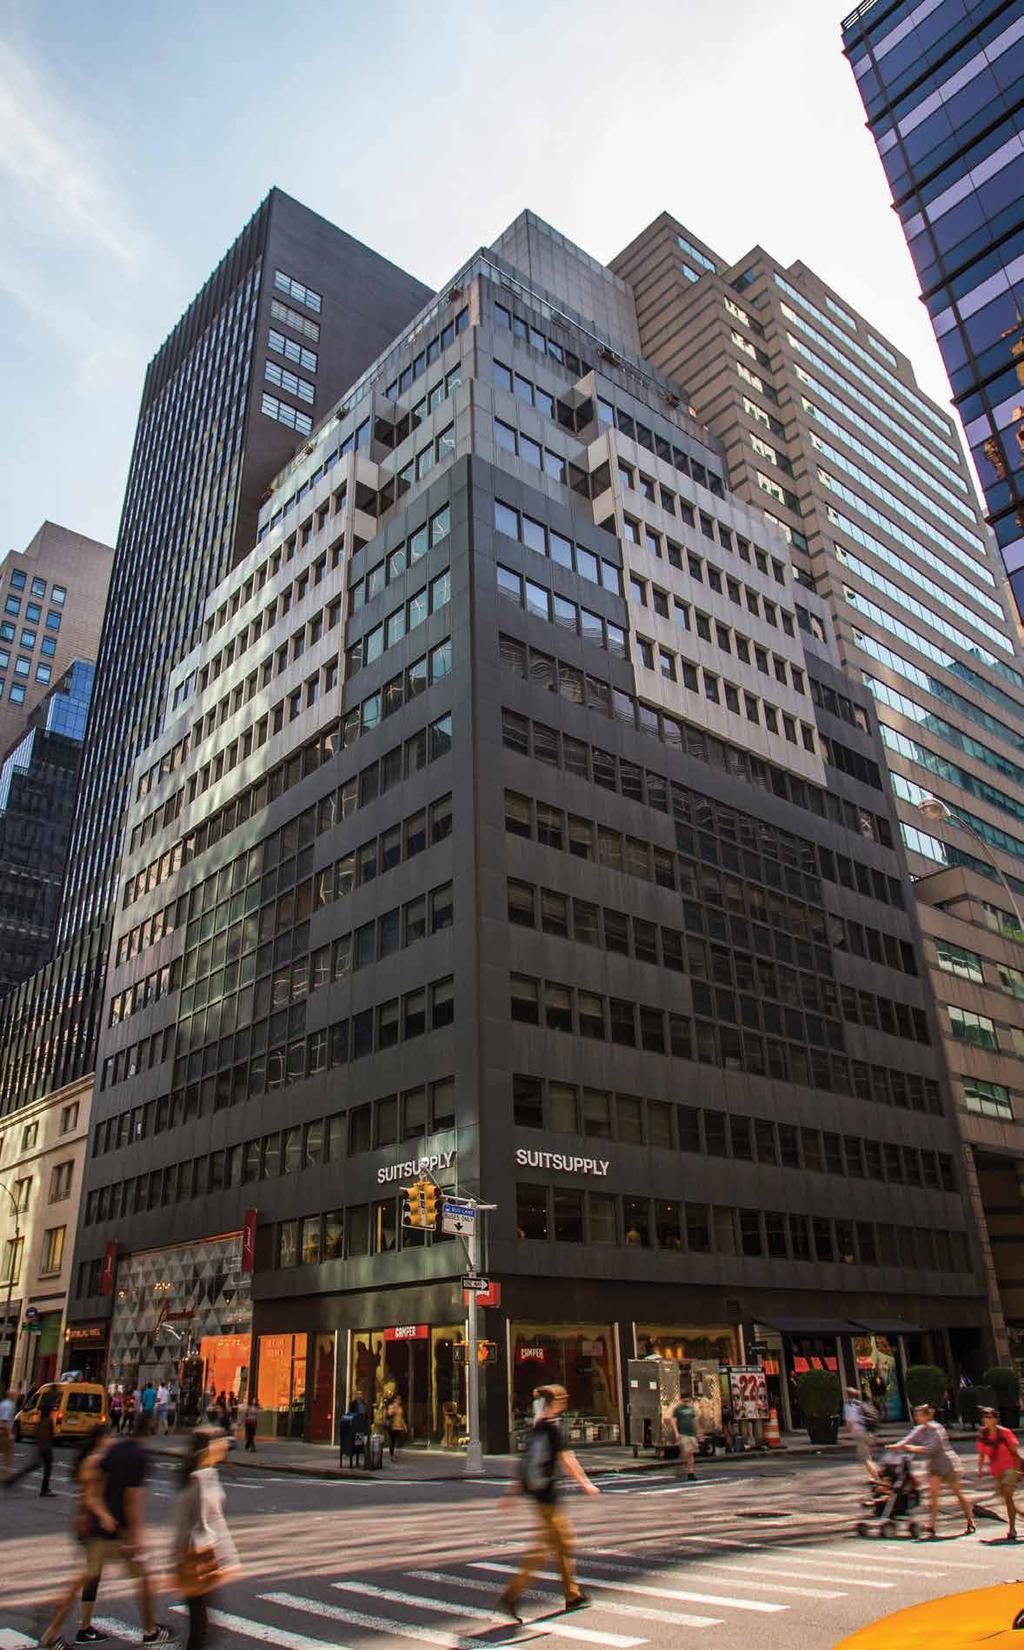 GLA: 150,000 sf retail, office Baccarat Molton Brown Camper Suitsupply Barneys New York Bally Calvin Klein DKNY 841 MADISON AVENUE NEW YORK, NY Located in Midtown Manhattan with views of